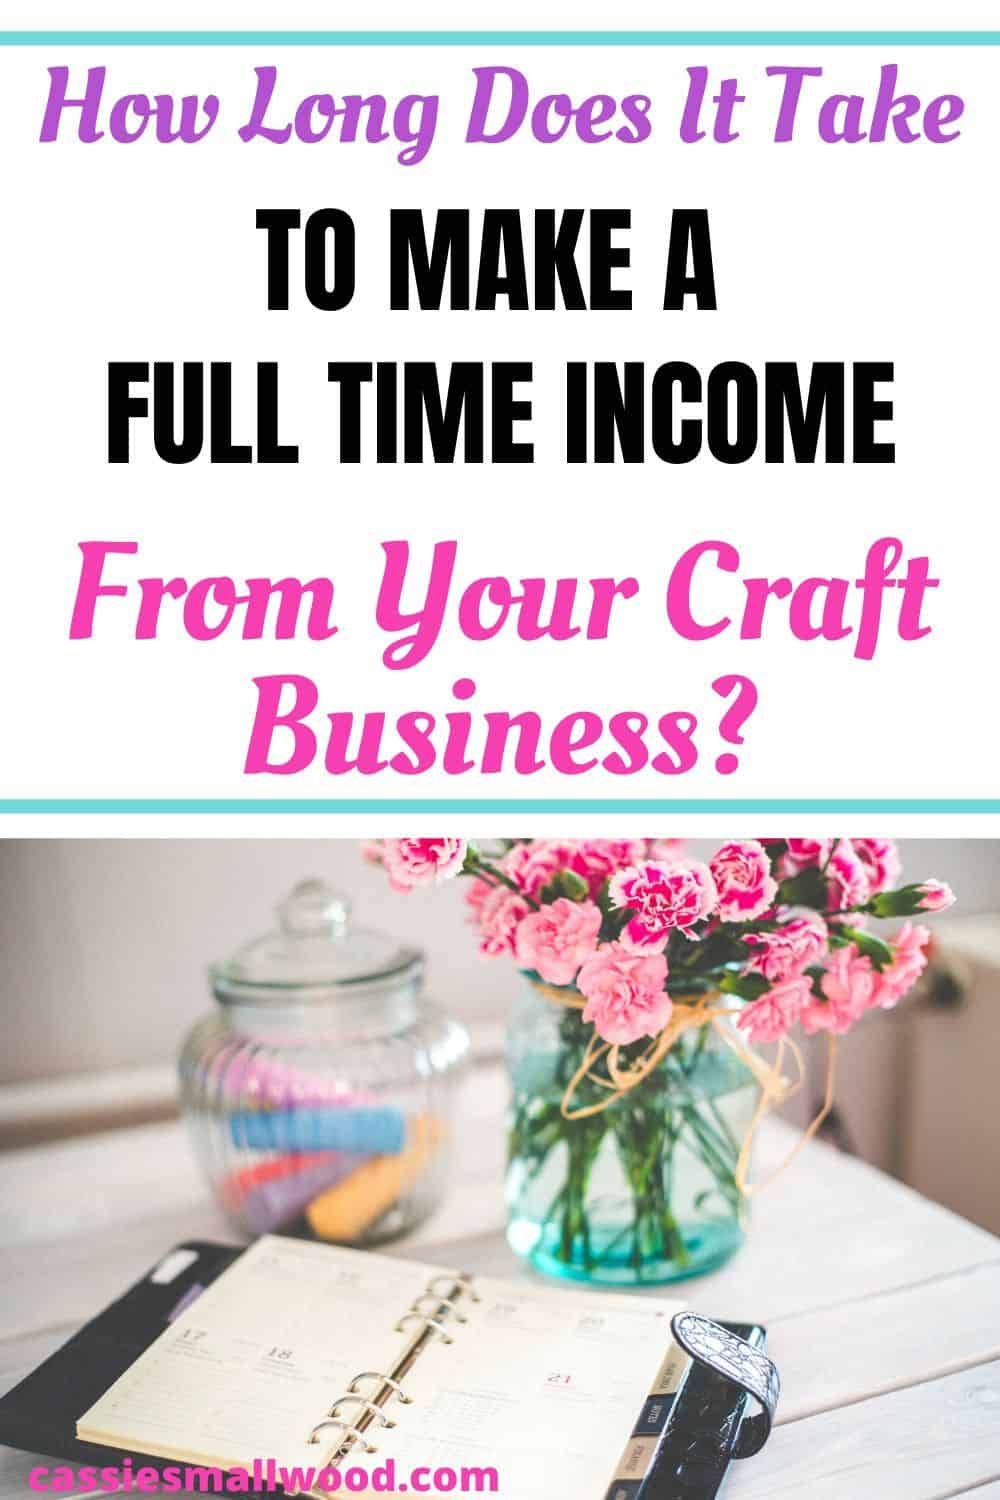 How long does it take to earn a full time income from selling crafts? I show you how you can earn money fast with your craft business so you can quit your 9 to 5 job and make a living selling handmade items on Etsy and Amazon Handmade. How to start selling easy diy crafts as a small business to make extra cash and become an entrepreneur who can support a family and lifestyle of your dreams. #etsysellingtips #craftbusinessideas